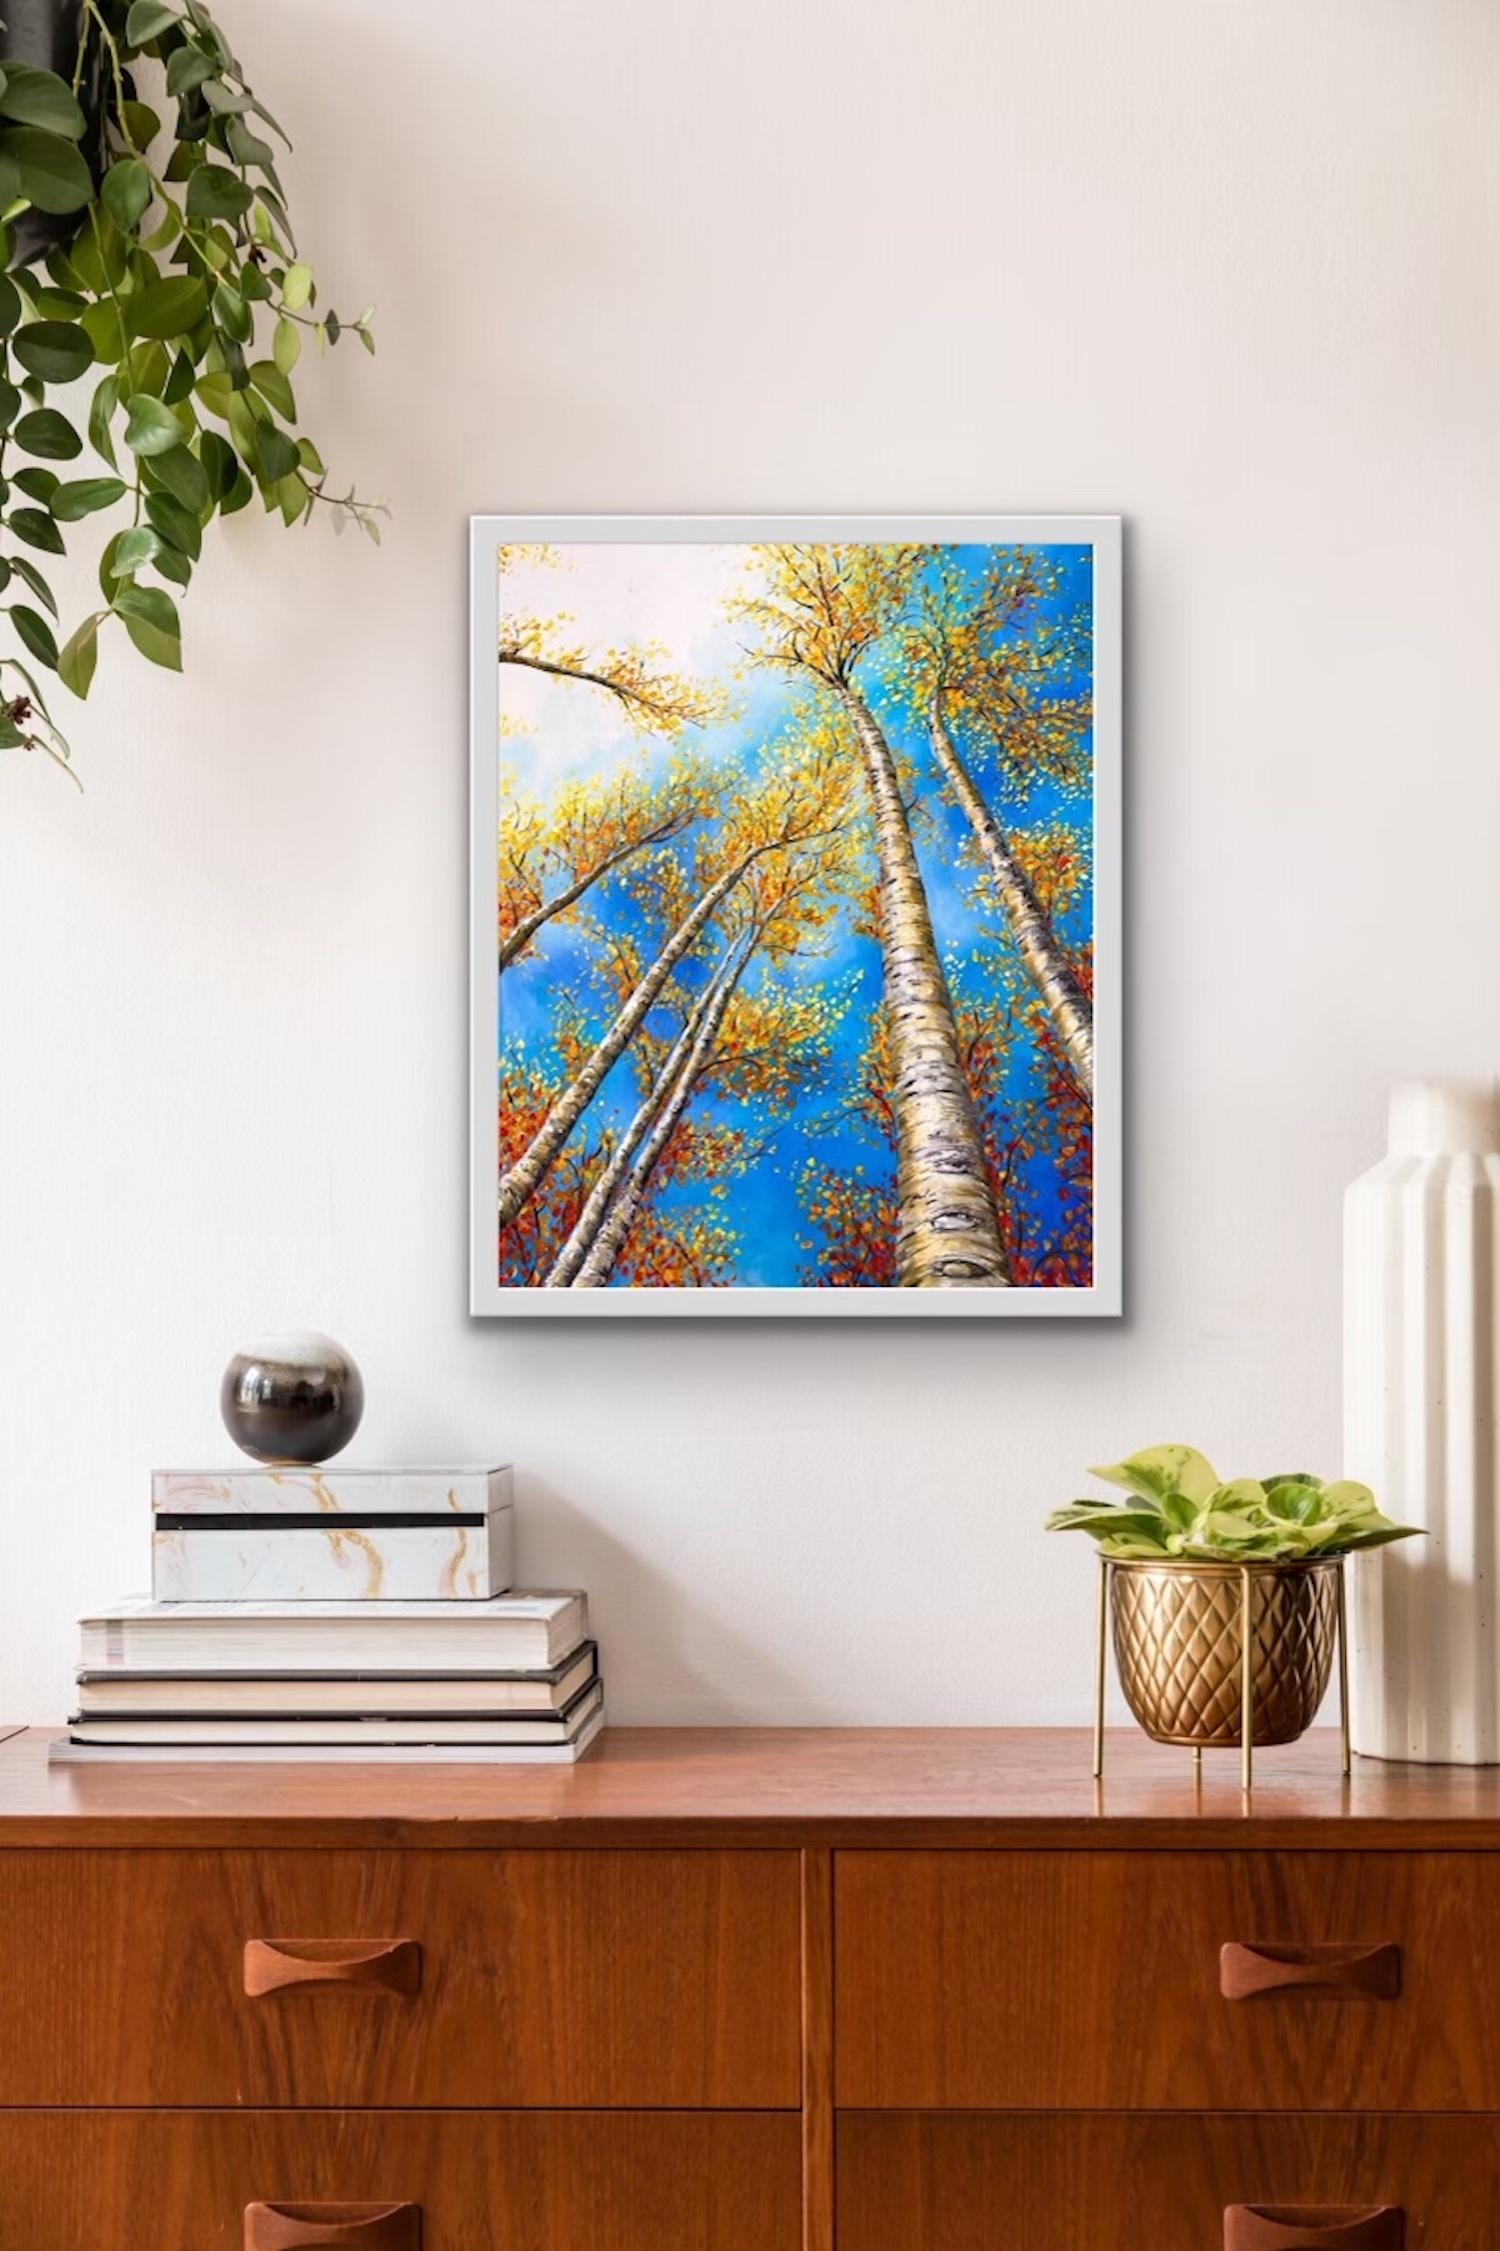 Serenity by Sophia Chalklen, Original painting, Tree painting, Landscape art - Abstract Painting by Sophia Chalklen 